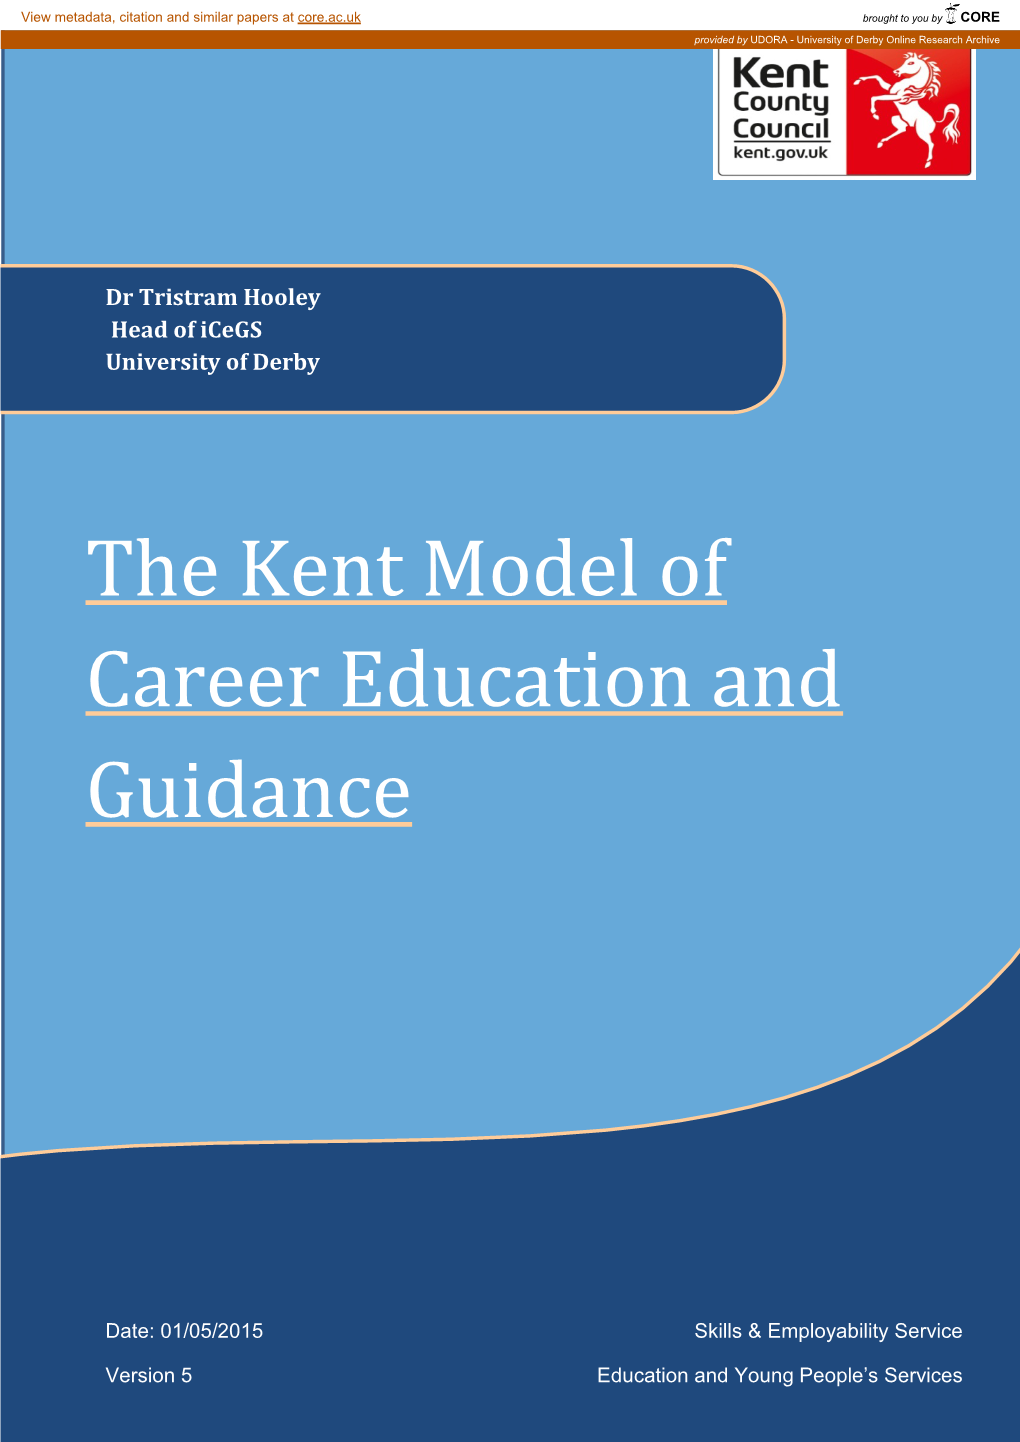 The Kent Model of Career Education and Guidance